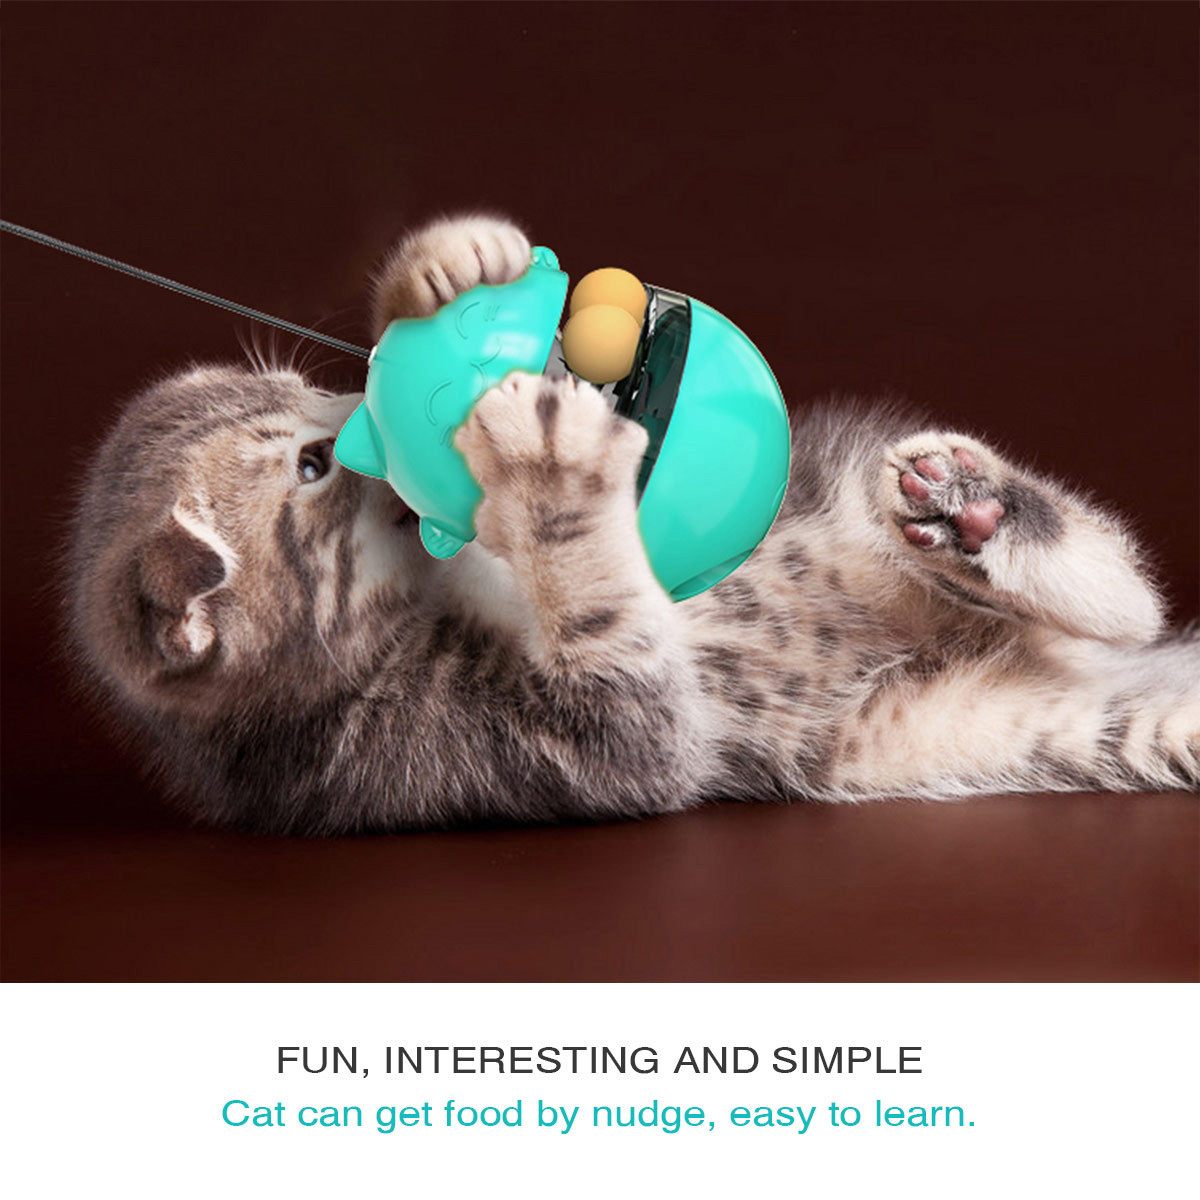 3-In-1-Interactive-Cat-Leaking-Food-Ball-with-Teasing-Wand-Pet-Slow-Food-1806335-4